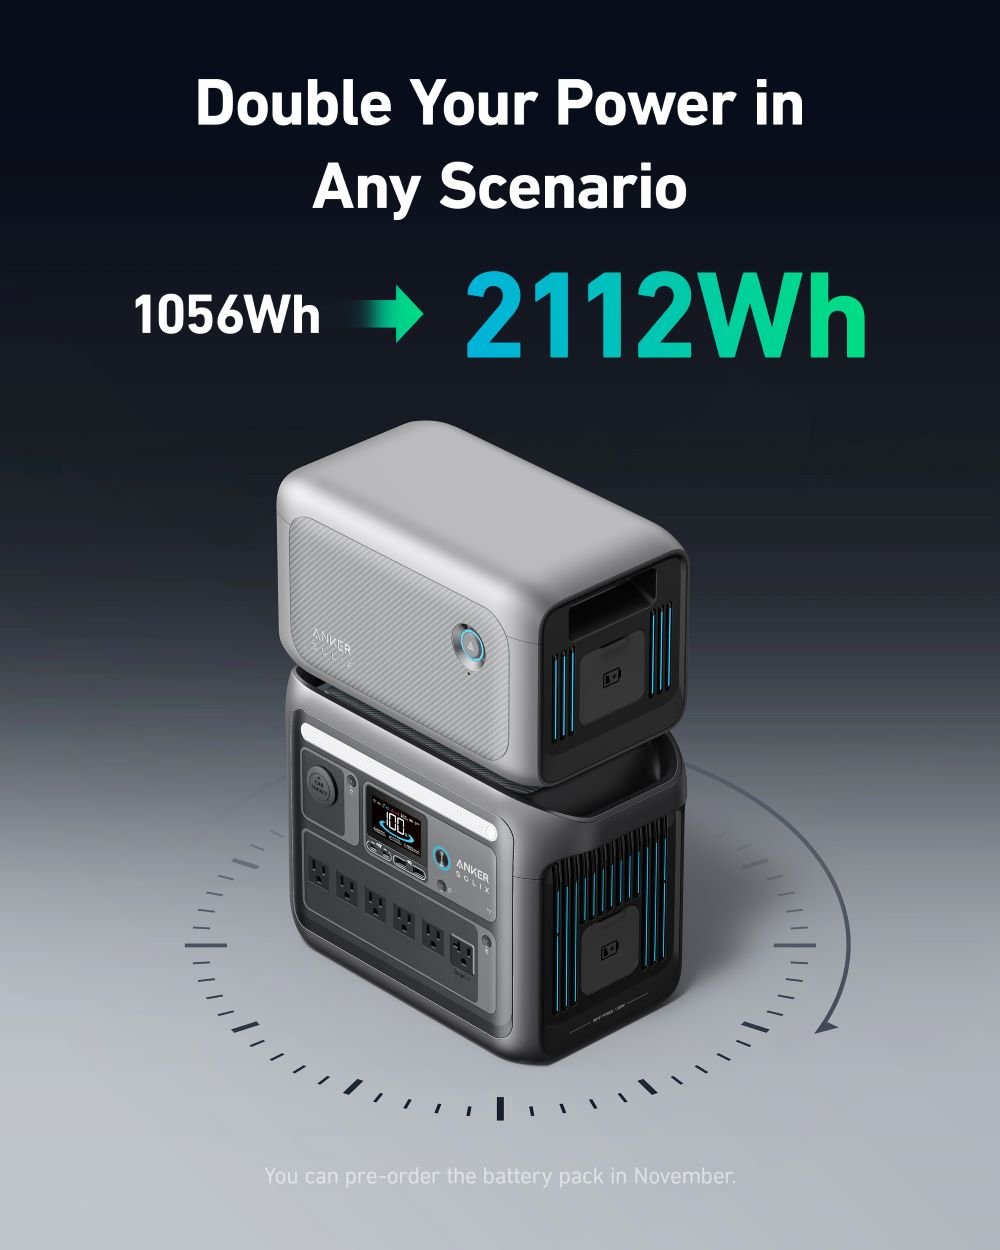 Graphic of Anker C1000 Portable Power Station + Expansion Battery for 2112Wh of Capacity